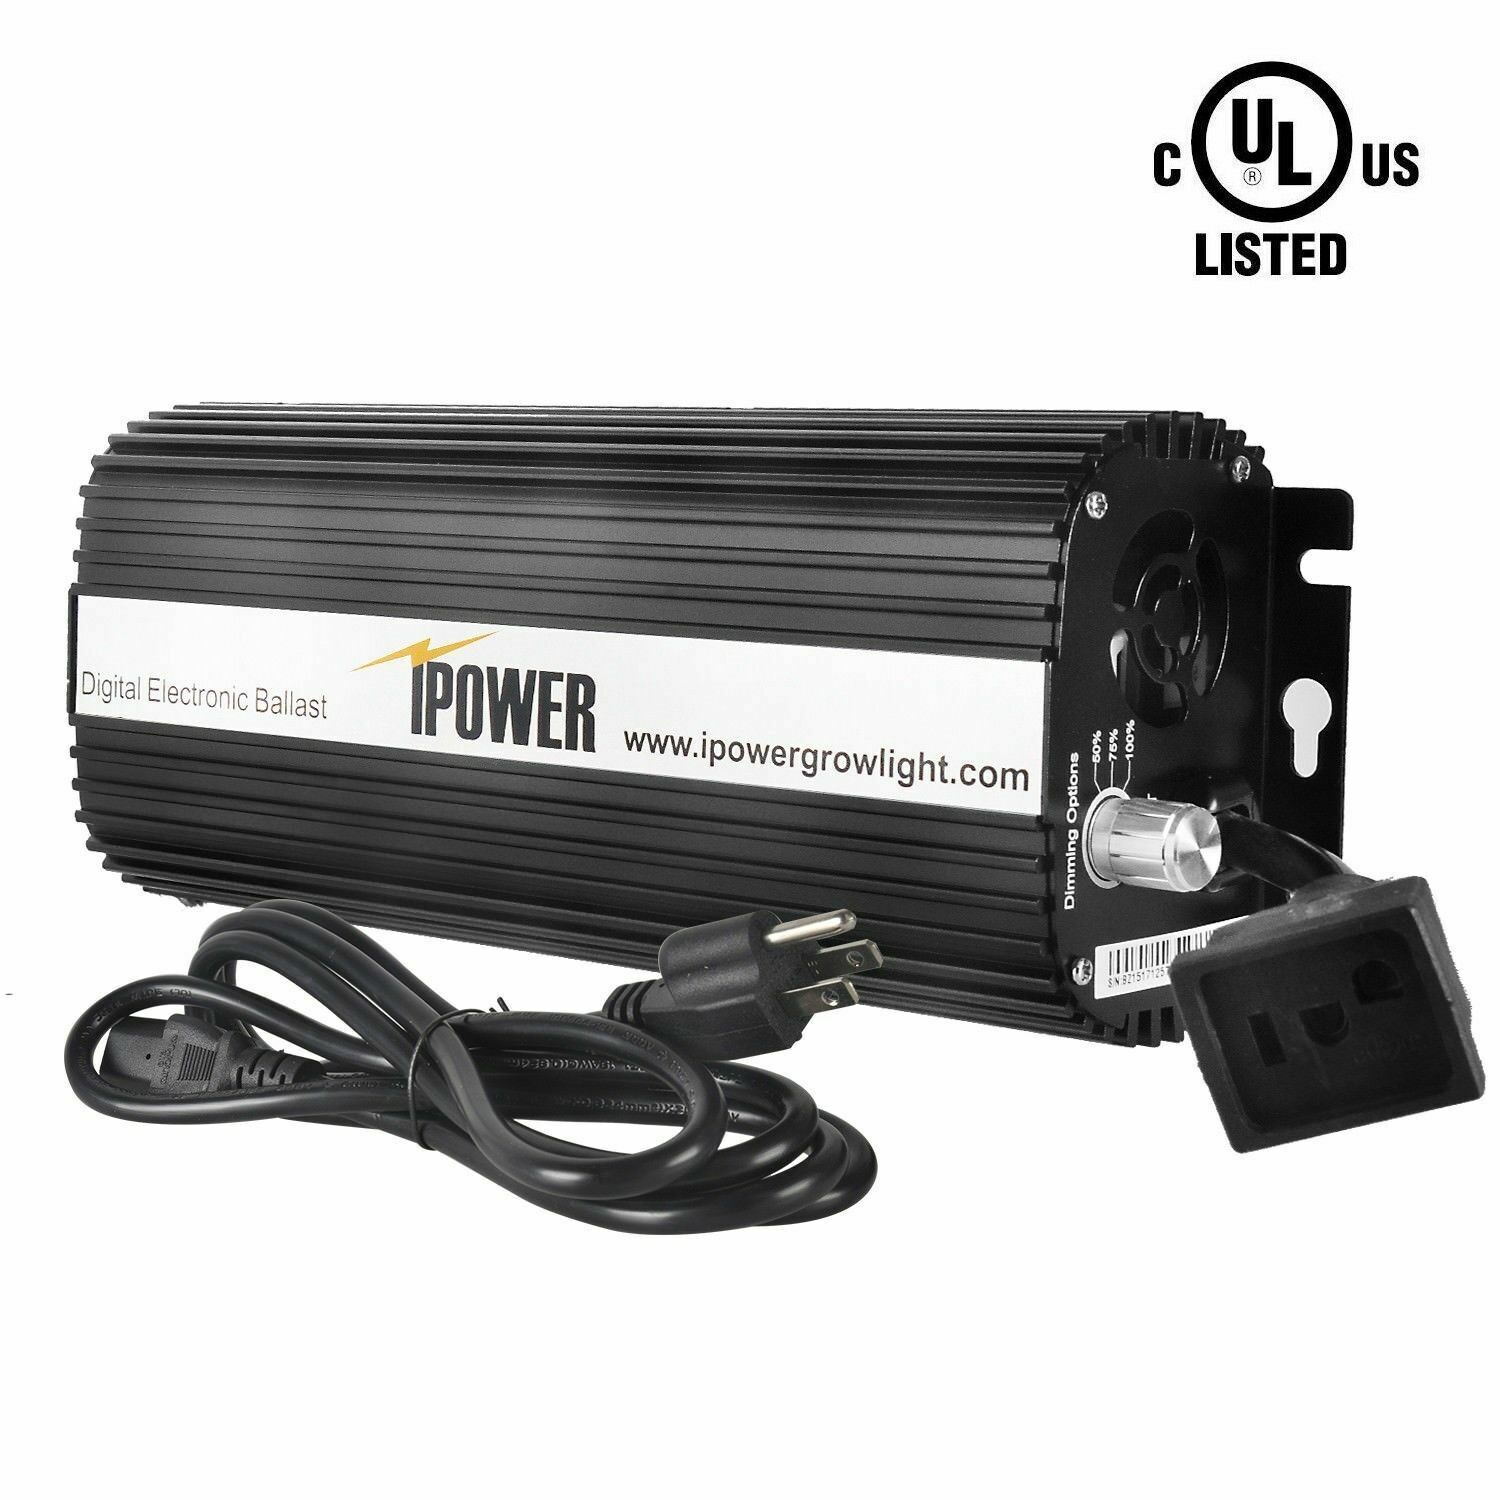 iPower 400/600/1000W Powerful Digital Dimmable Electronic Ballast for Grow Light